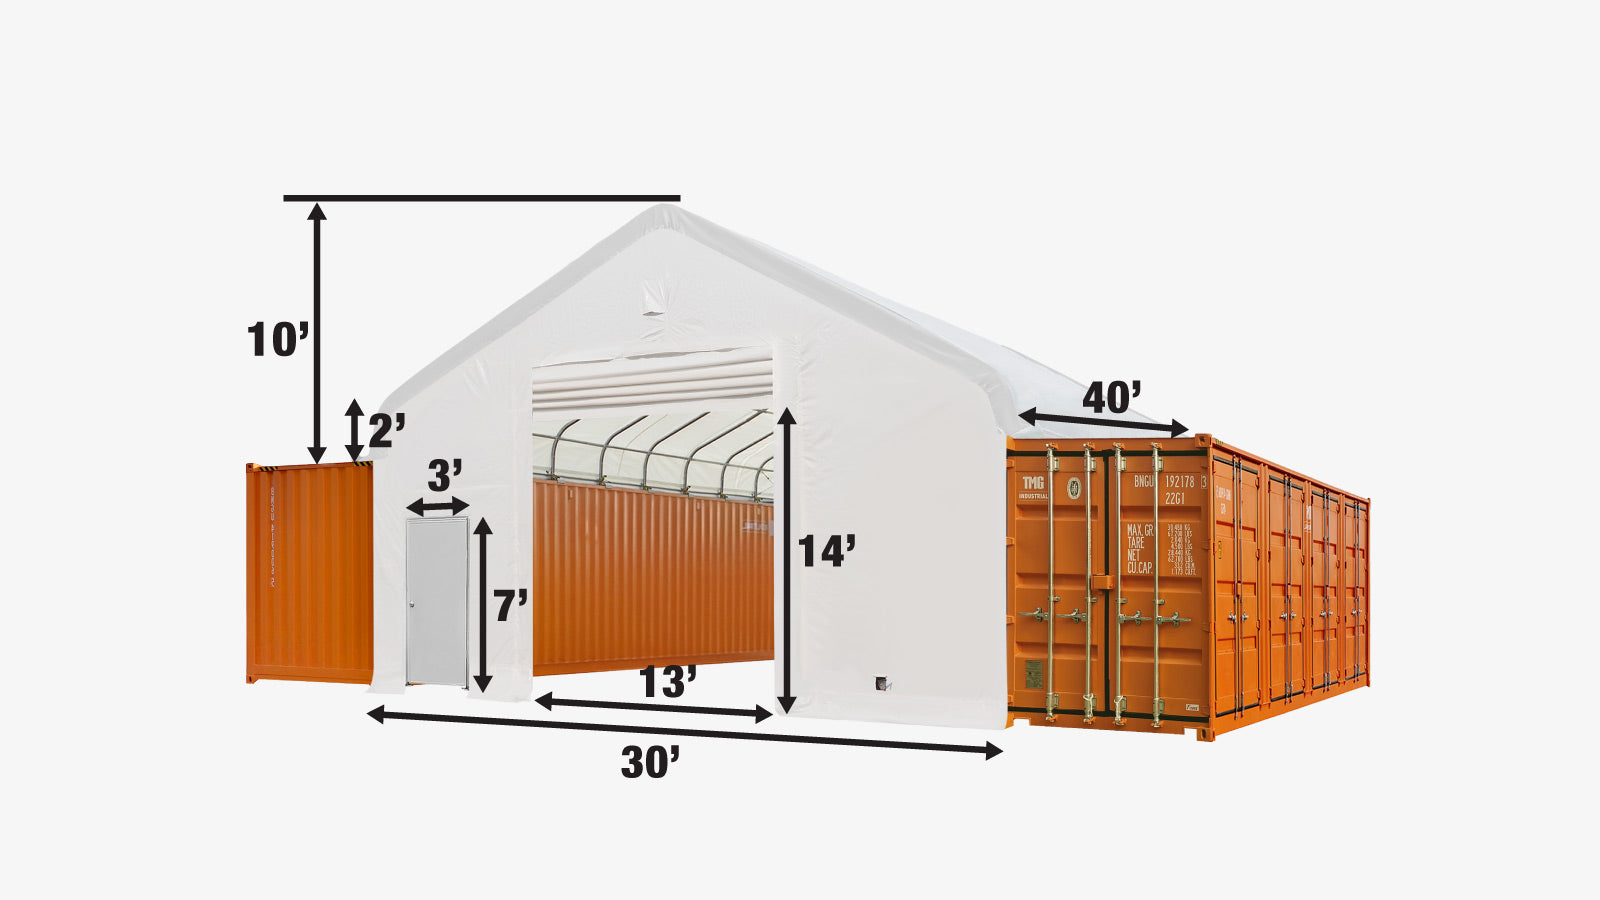 Products TMG Industrial 30' x 40' Container Peak Roof Shelter Pro Series with Heavy Duty 17 oz PVC Cover, Fully Enclosed front and back endwalls, TMG-ST3041CG-specifications-image